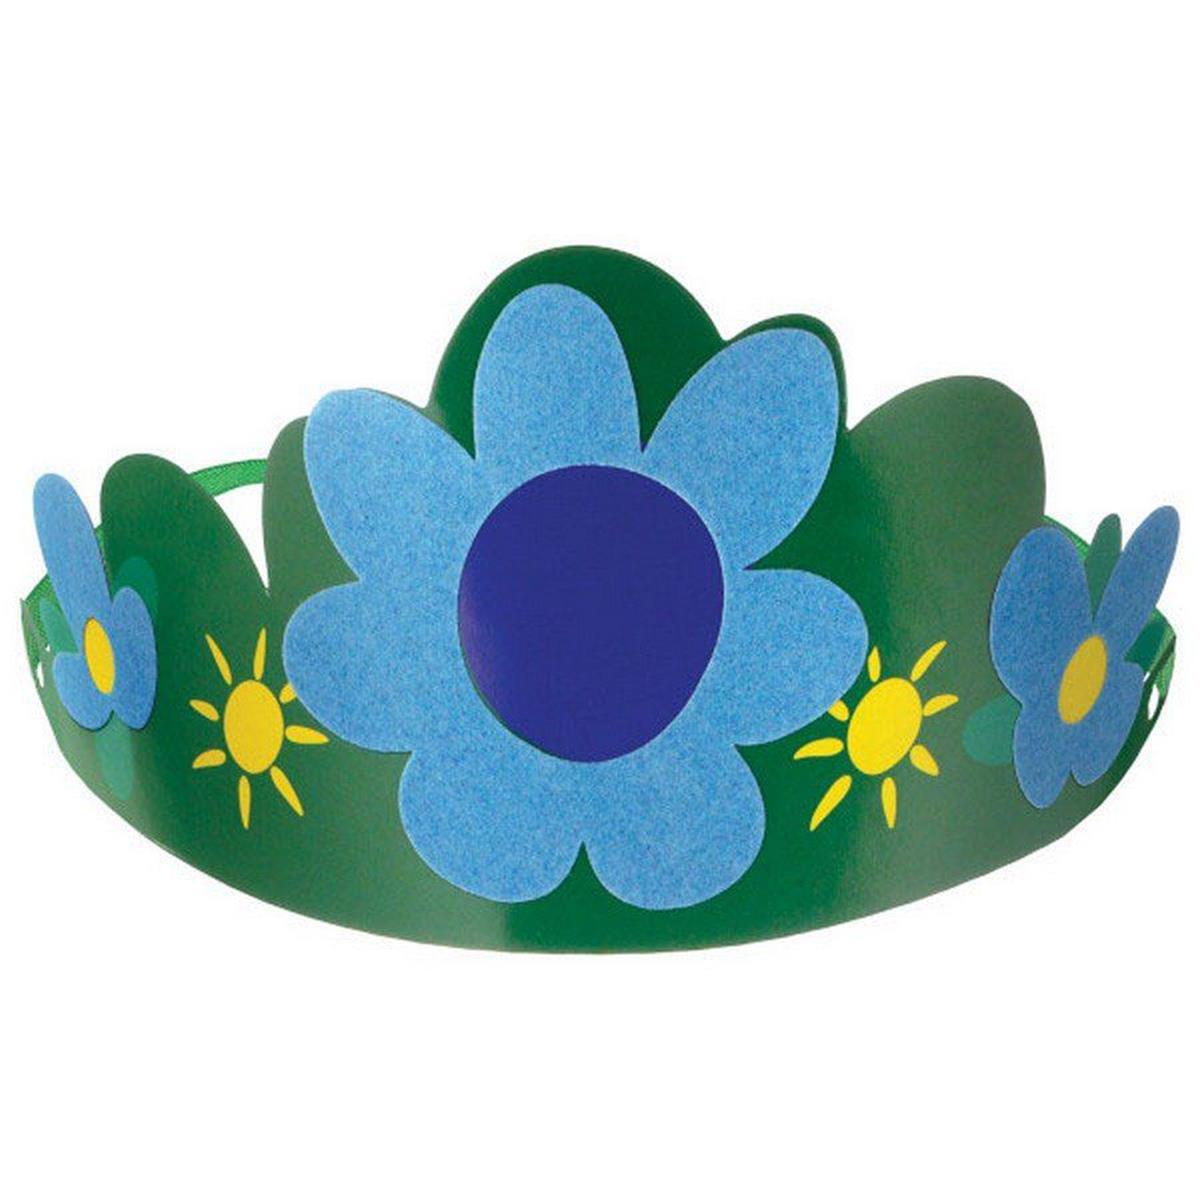 Picture of Amscan 644291 Trolls World Tour Paper Tiaras - Pack of 8